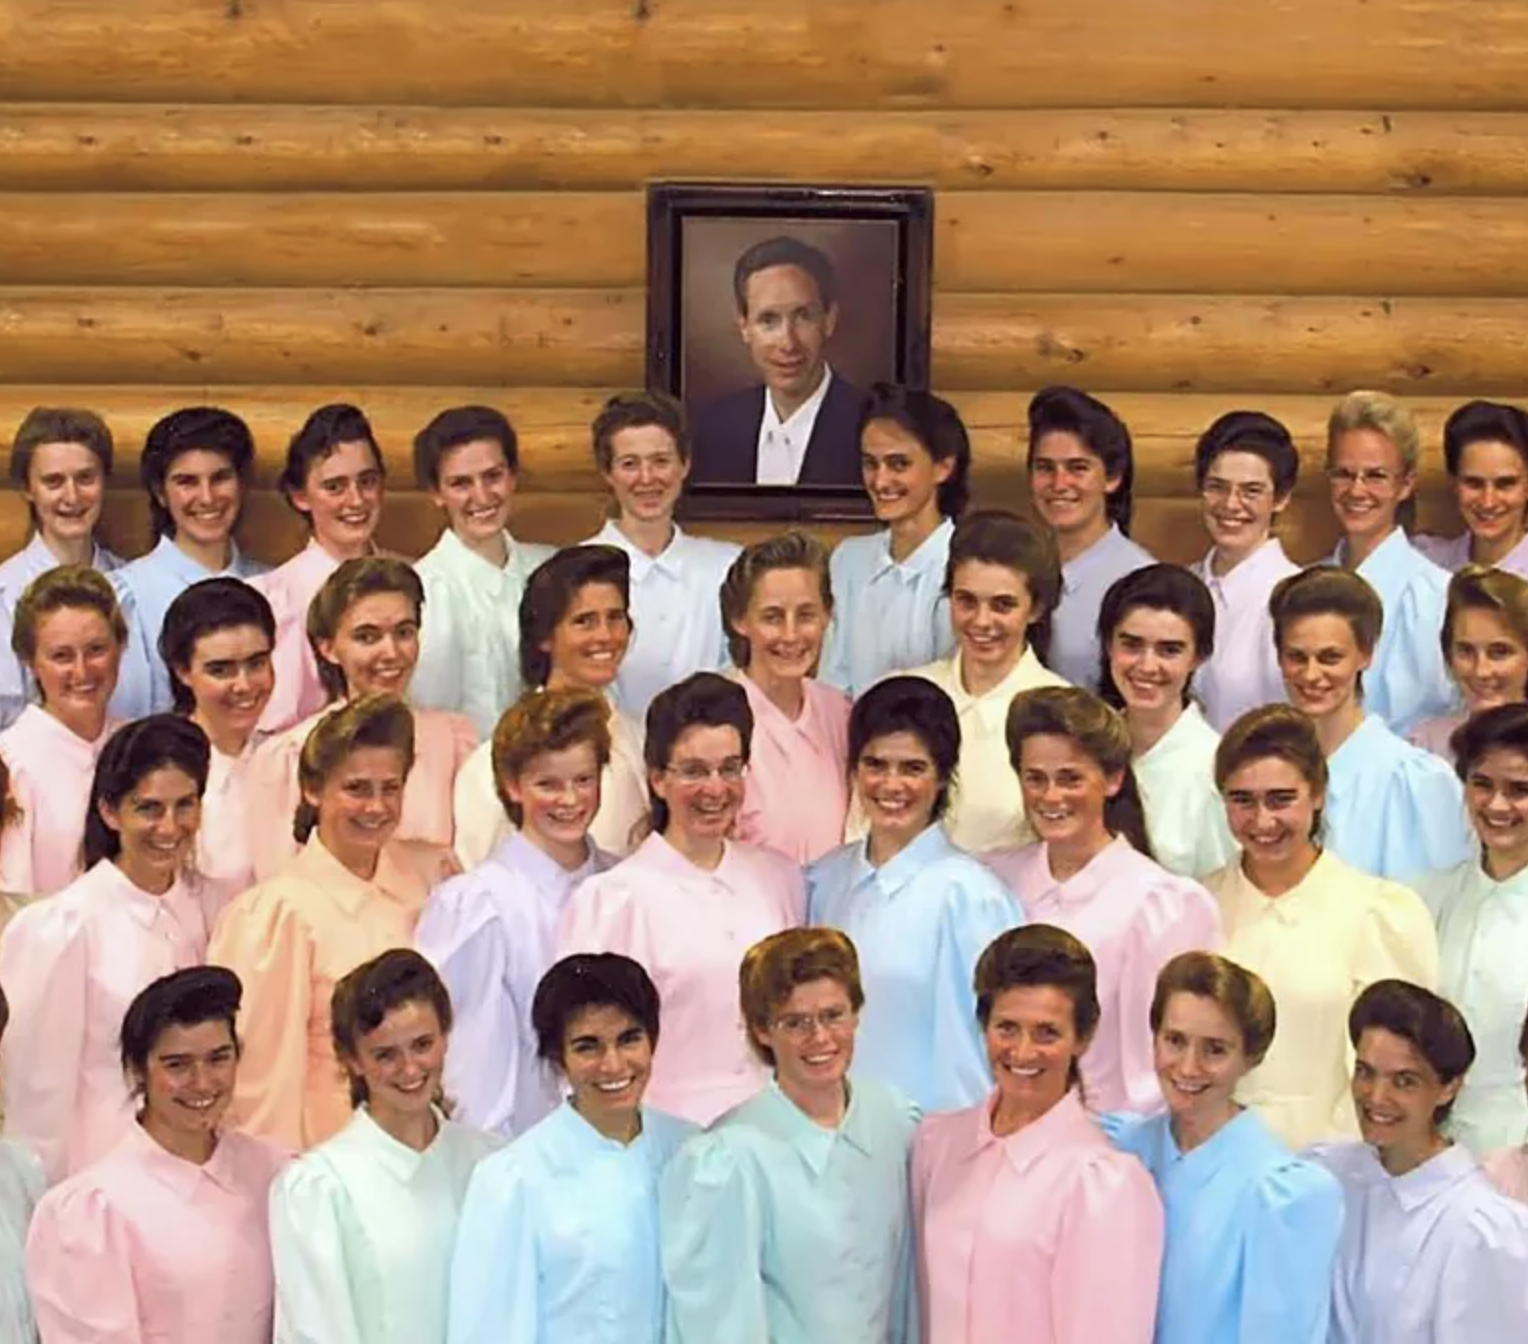 Warren Jeffs is up there. Cult leader who managed to gain control of about 20-40k people's lives by moving them all to a place that is completely controlled by the cult. Managed to take a lot of their companies and has a lot of financial power. <br><br>

He then used this money to make a temple dedicated to raping the children of cult members. <br><br>

They still worship him to this day despite him being in jail. - u/Nutteralex-Gaming